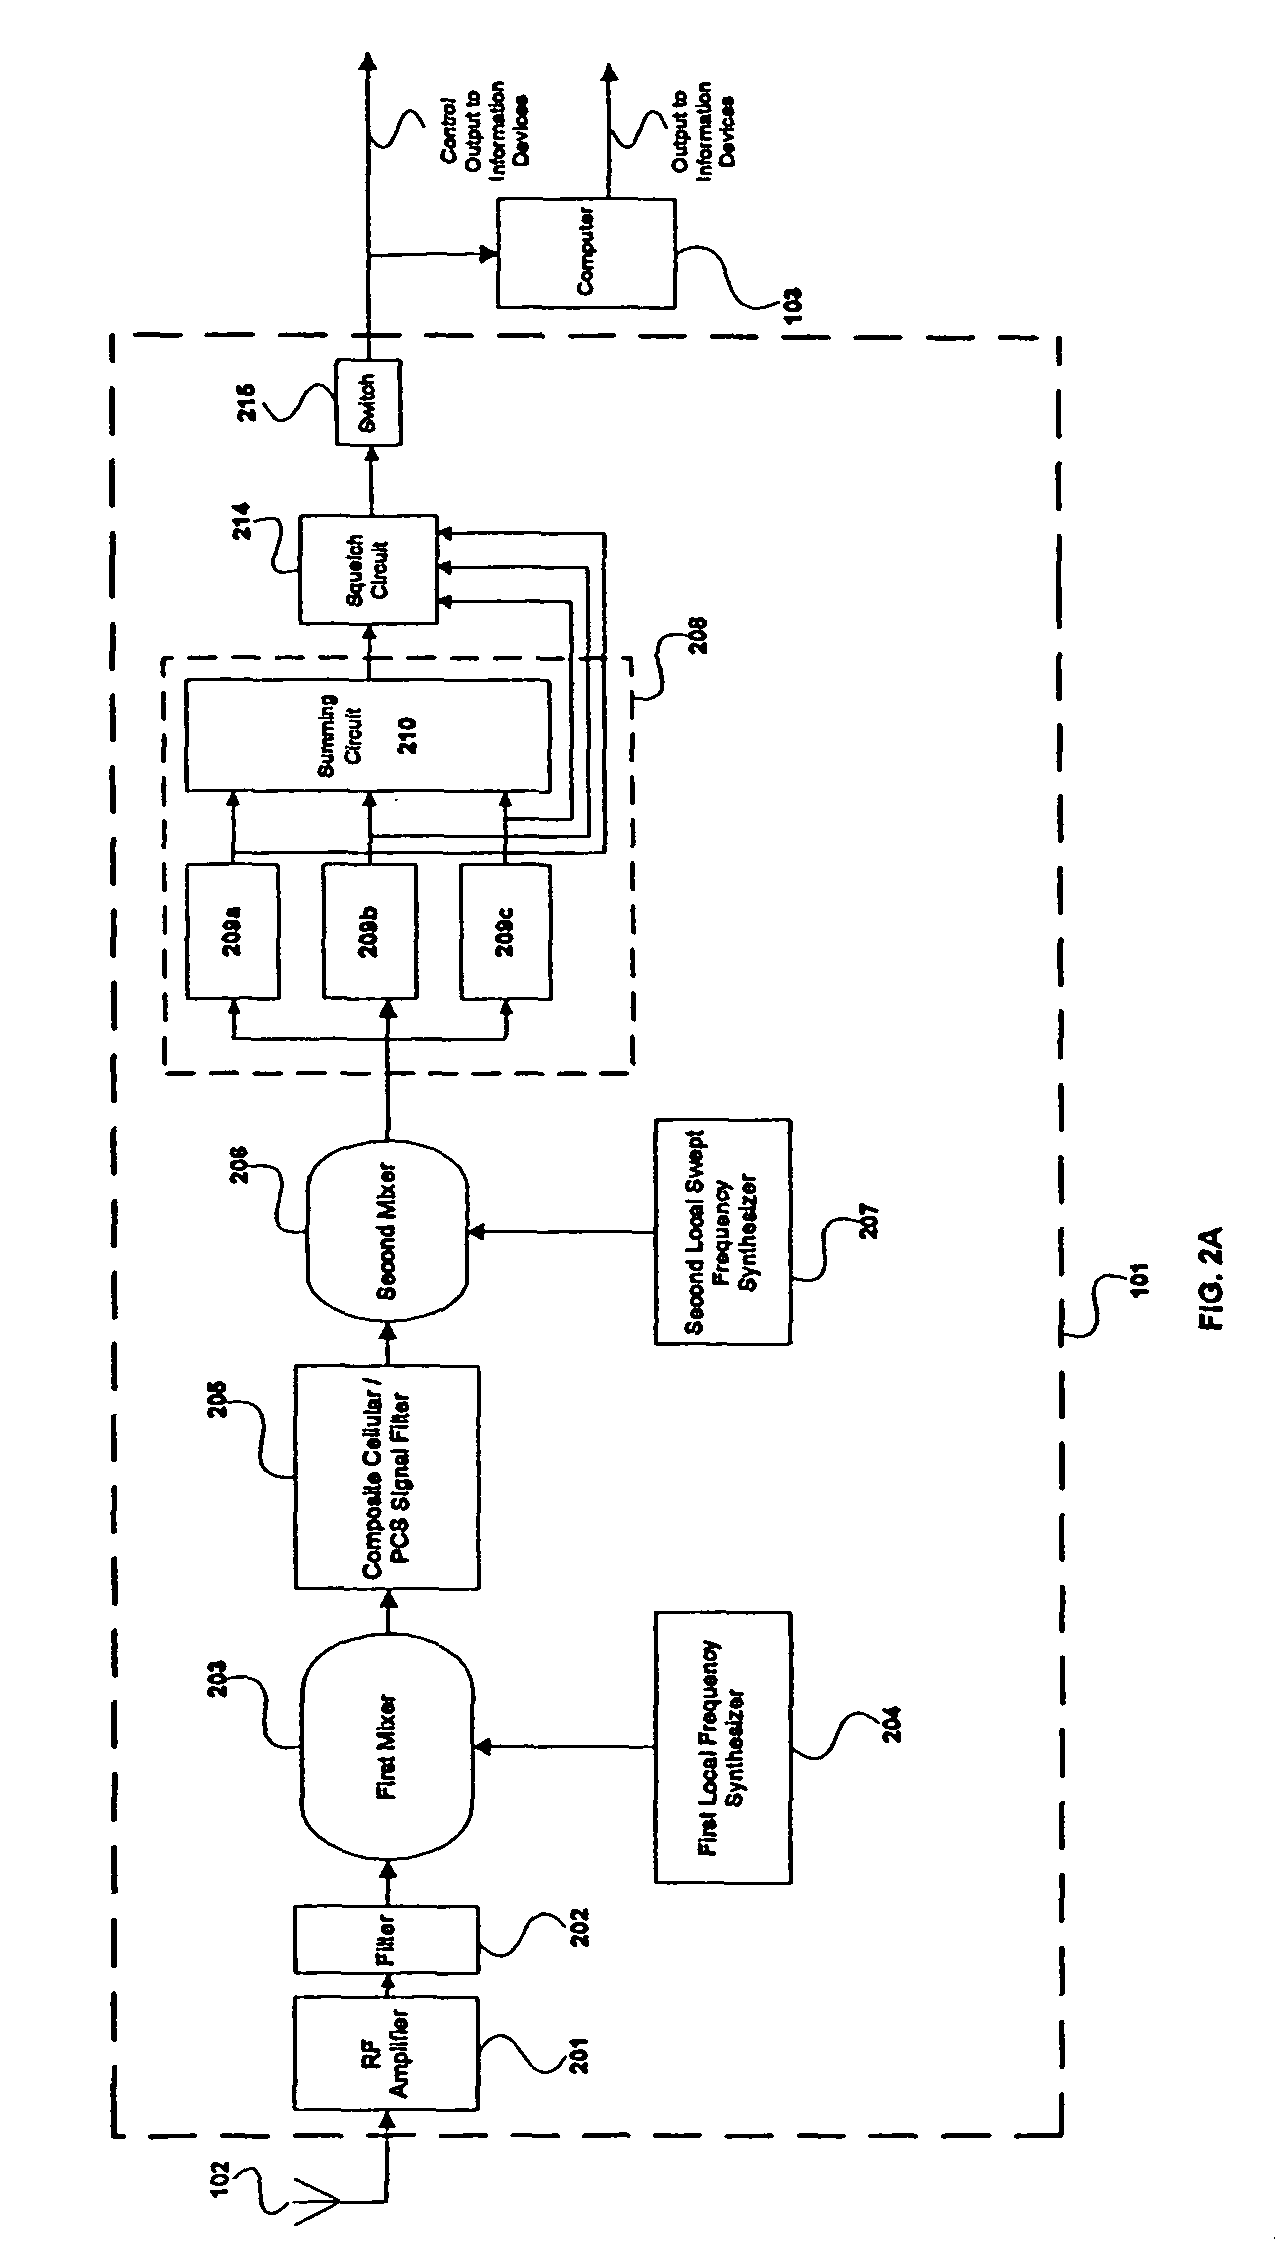 System and method for detecting wireless communications activity within a predetermined area and for generating messages to selected communication devices